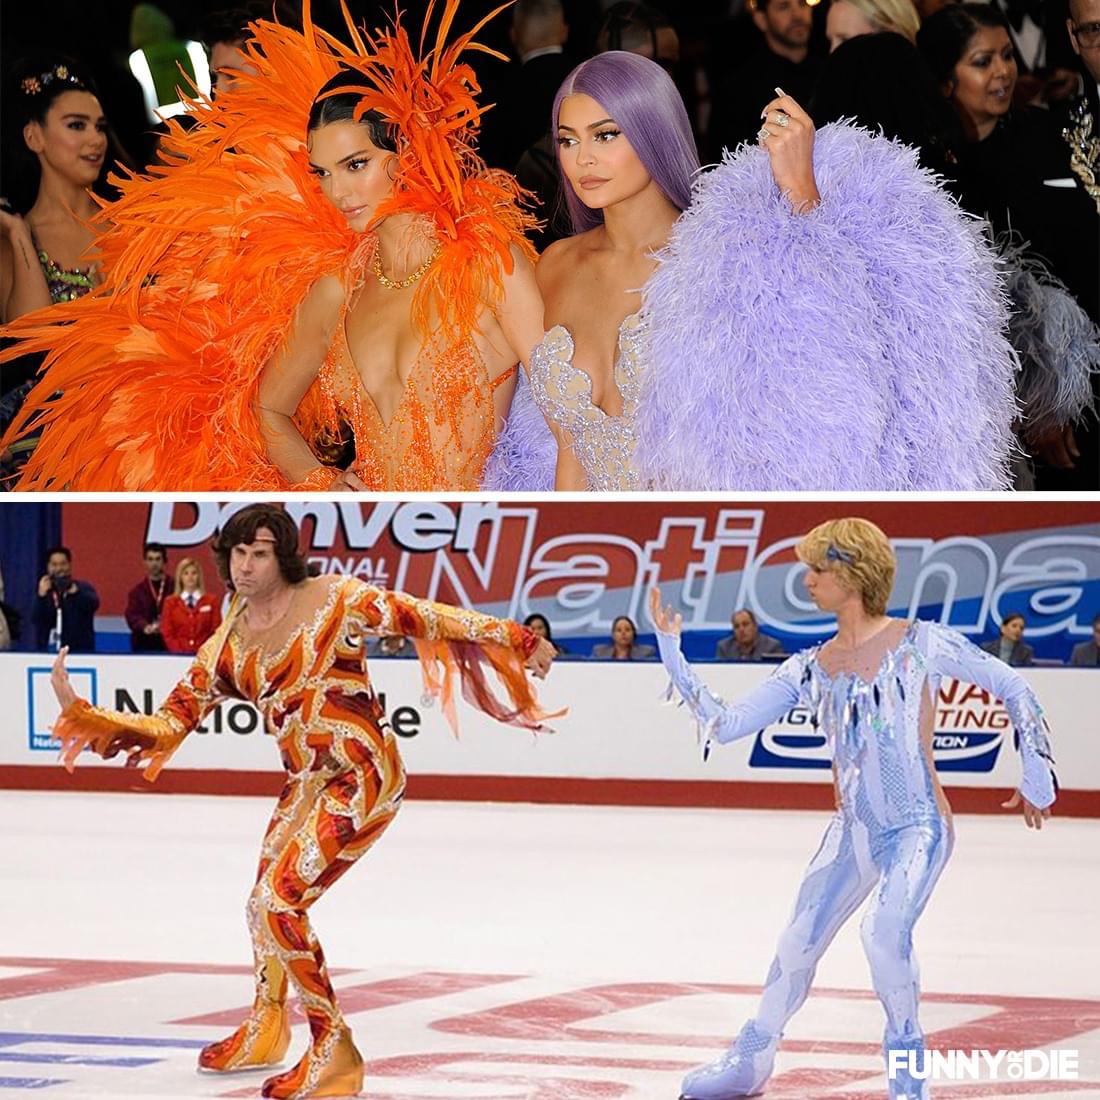 fire ice blades of glory - Al In Tot Va Ting Ion Funny Die